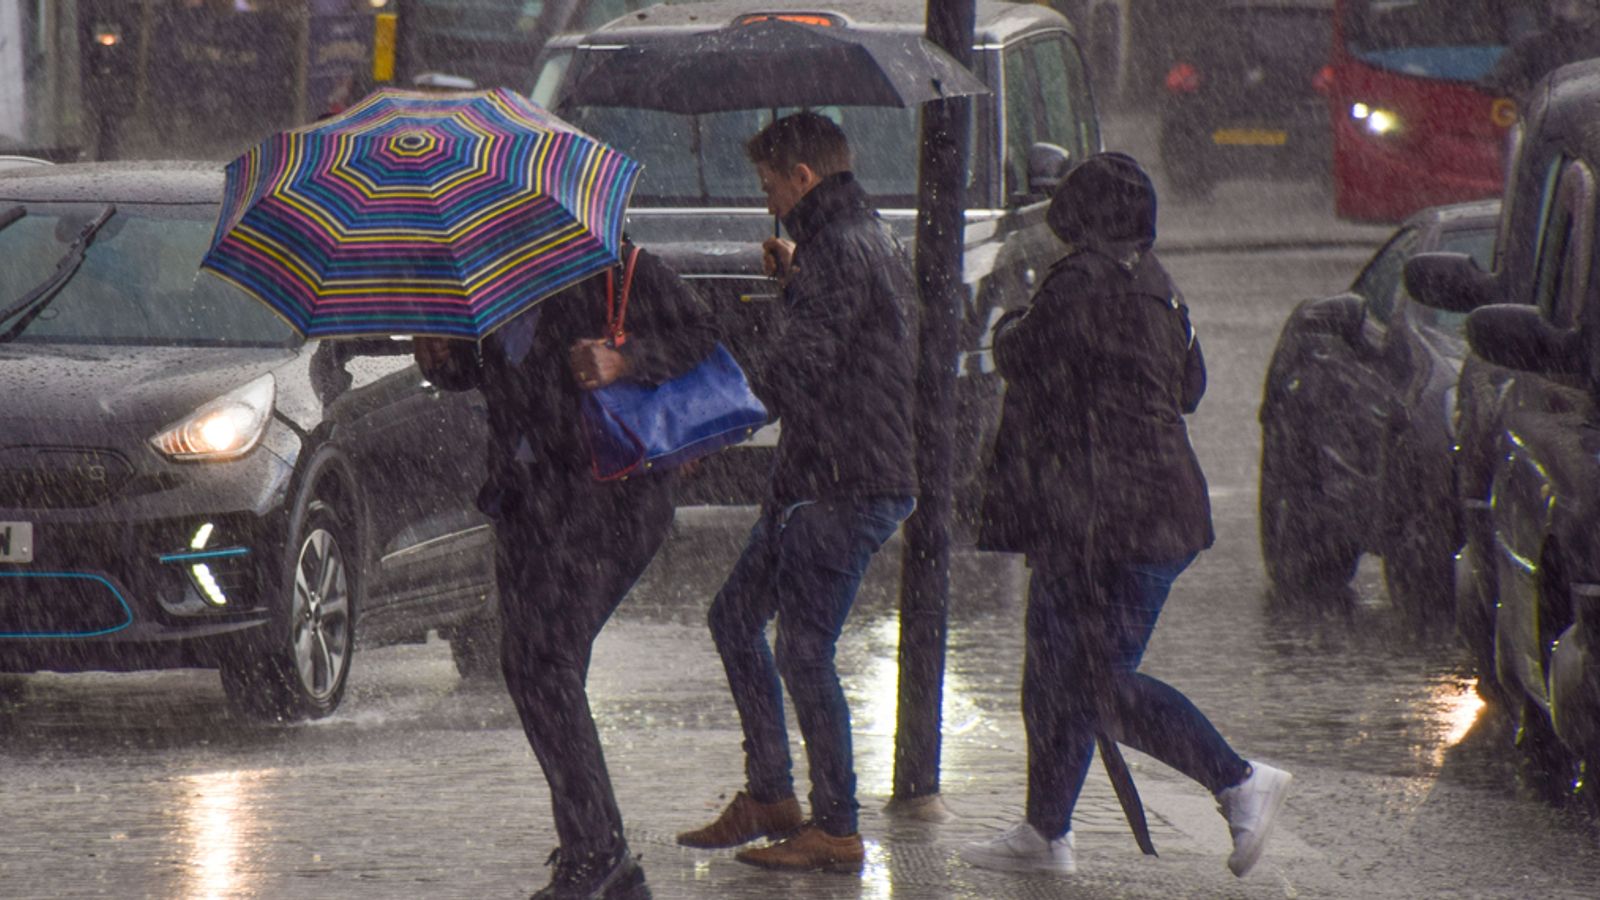 UK weather: Met Office yellow warnings blanket country - some areas could see half a month's worth of rain fall in a day